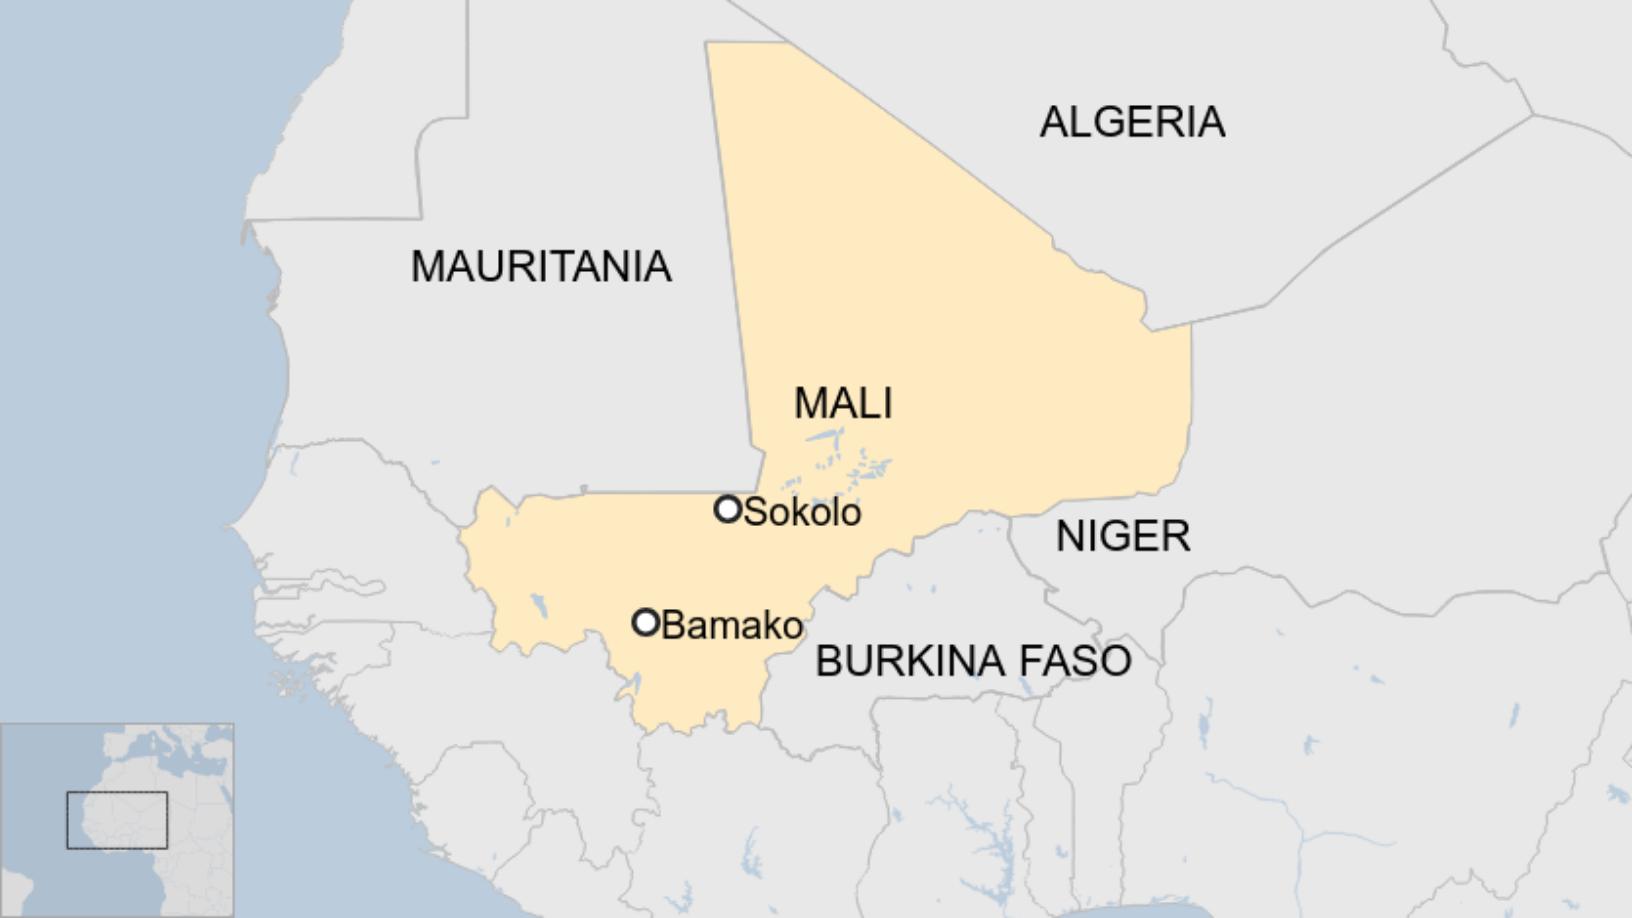 Map: Map showing Mali, with Sokolo, the site of an attack on soldiers by suspected militants